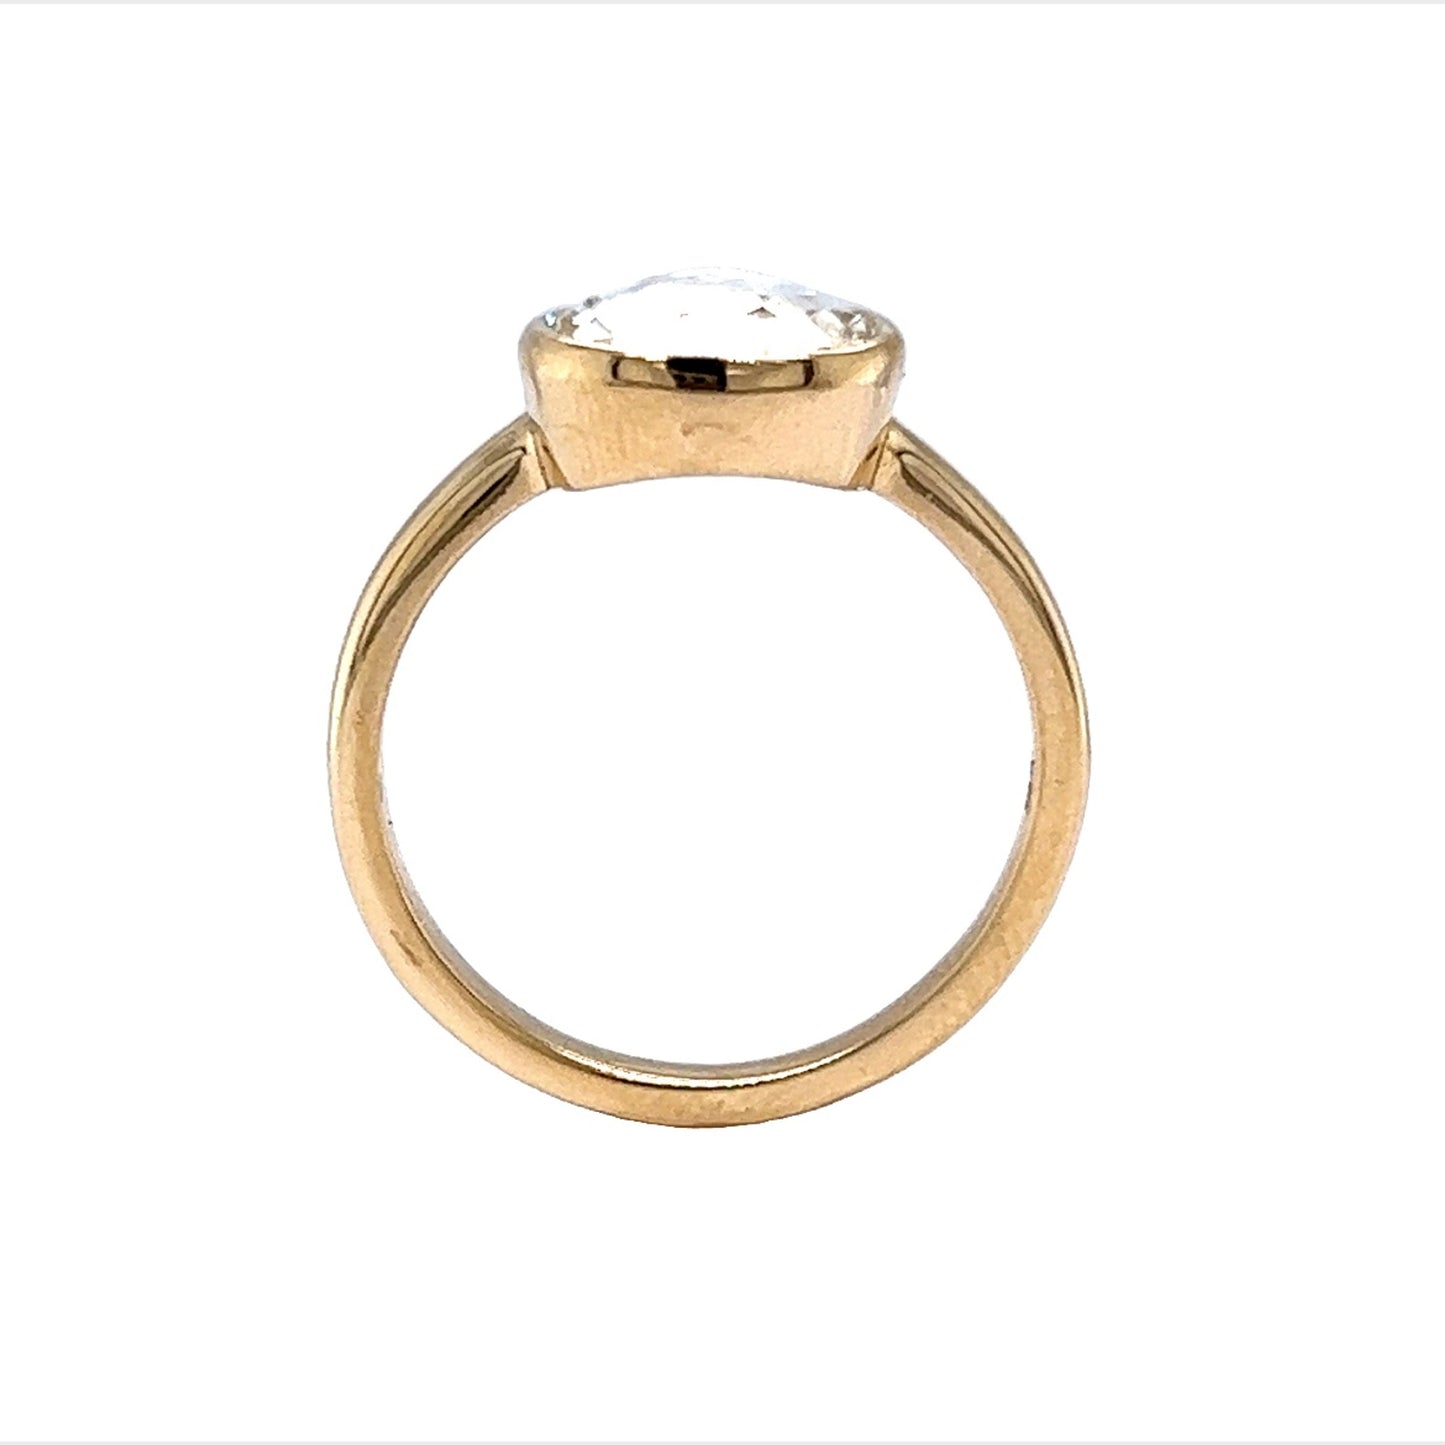 2.63 Pear Shaped Rose Cut Diamond Engagement Ring in 14k Yellow gold